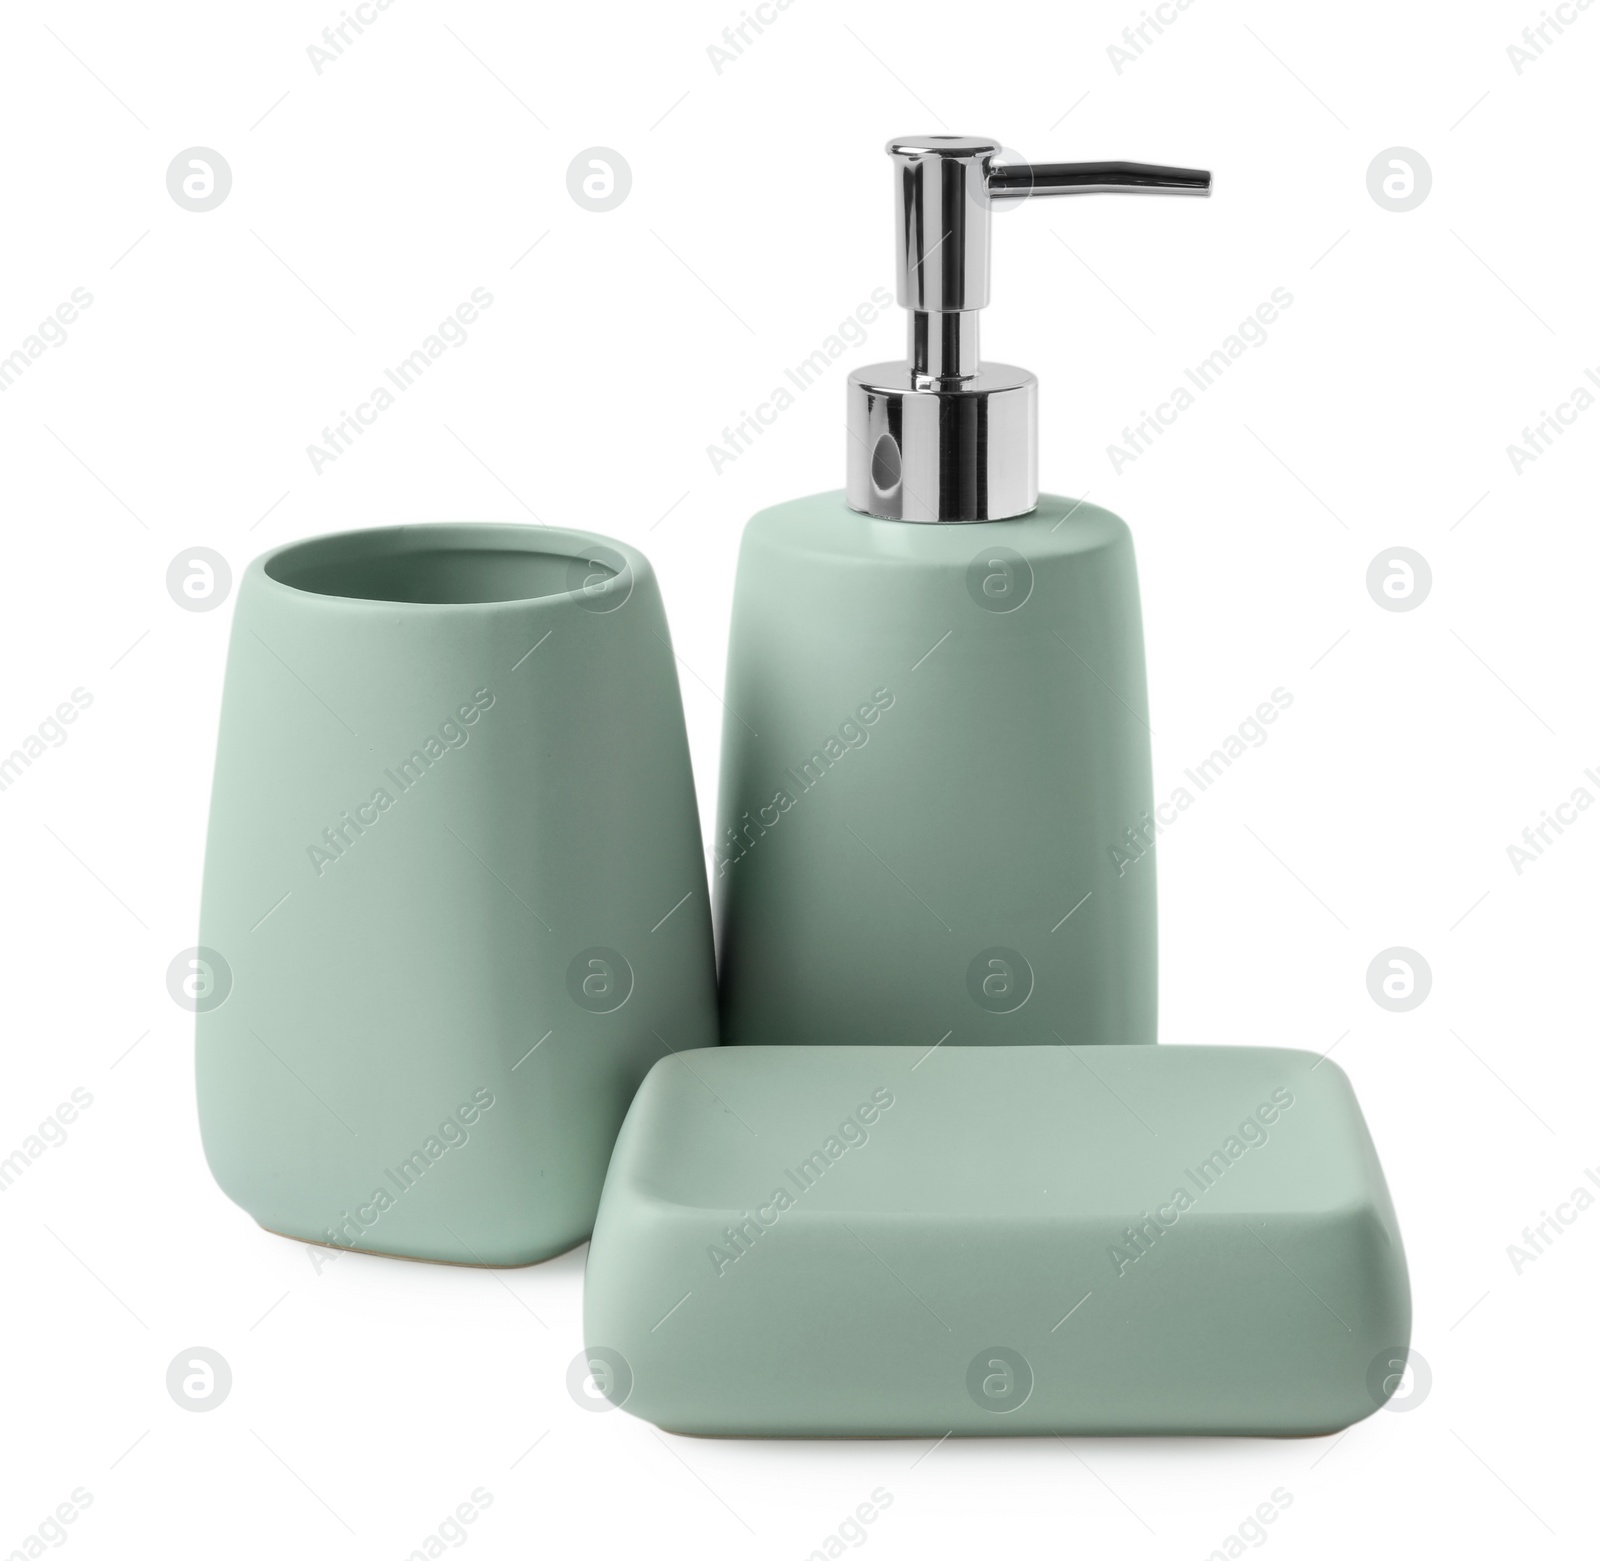 Photo of Set of bath accessories isolated on white